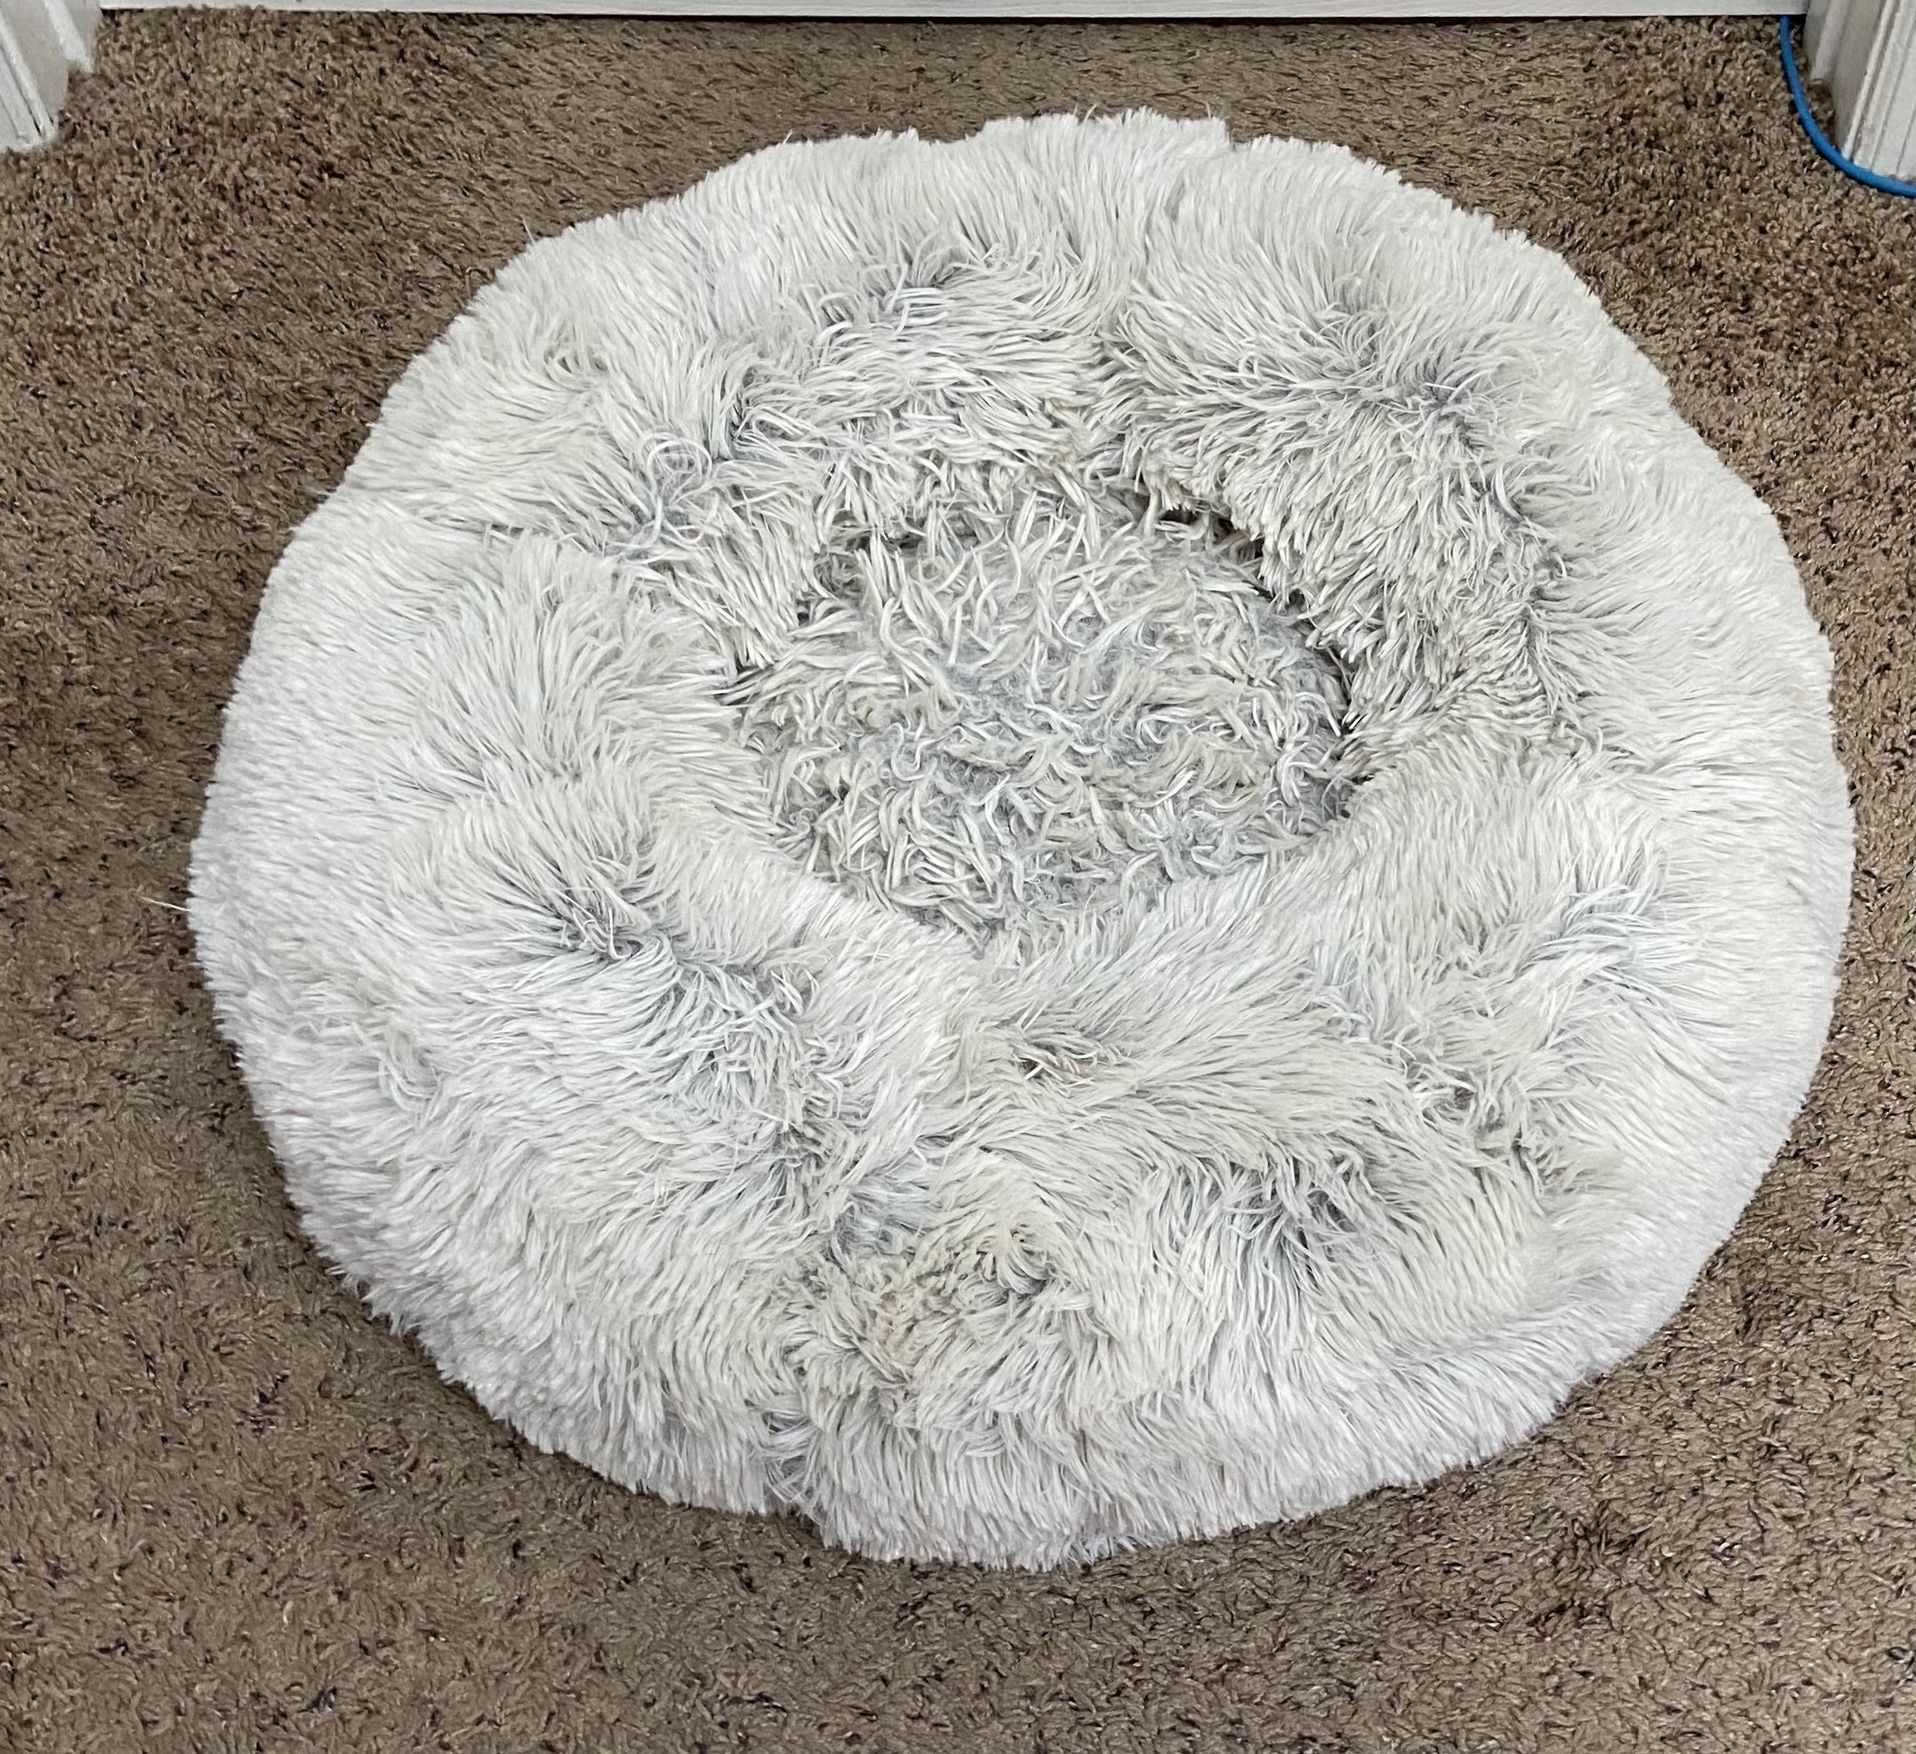 Small Pet Bed Just $3